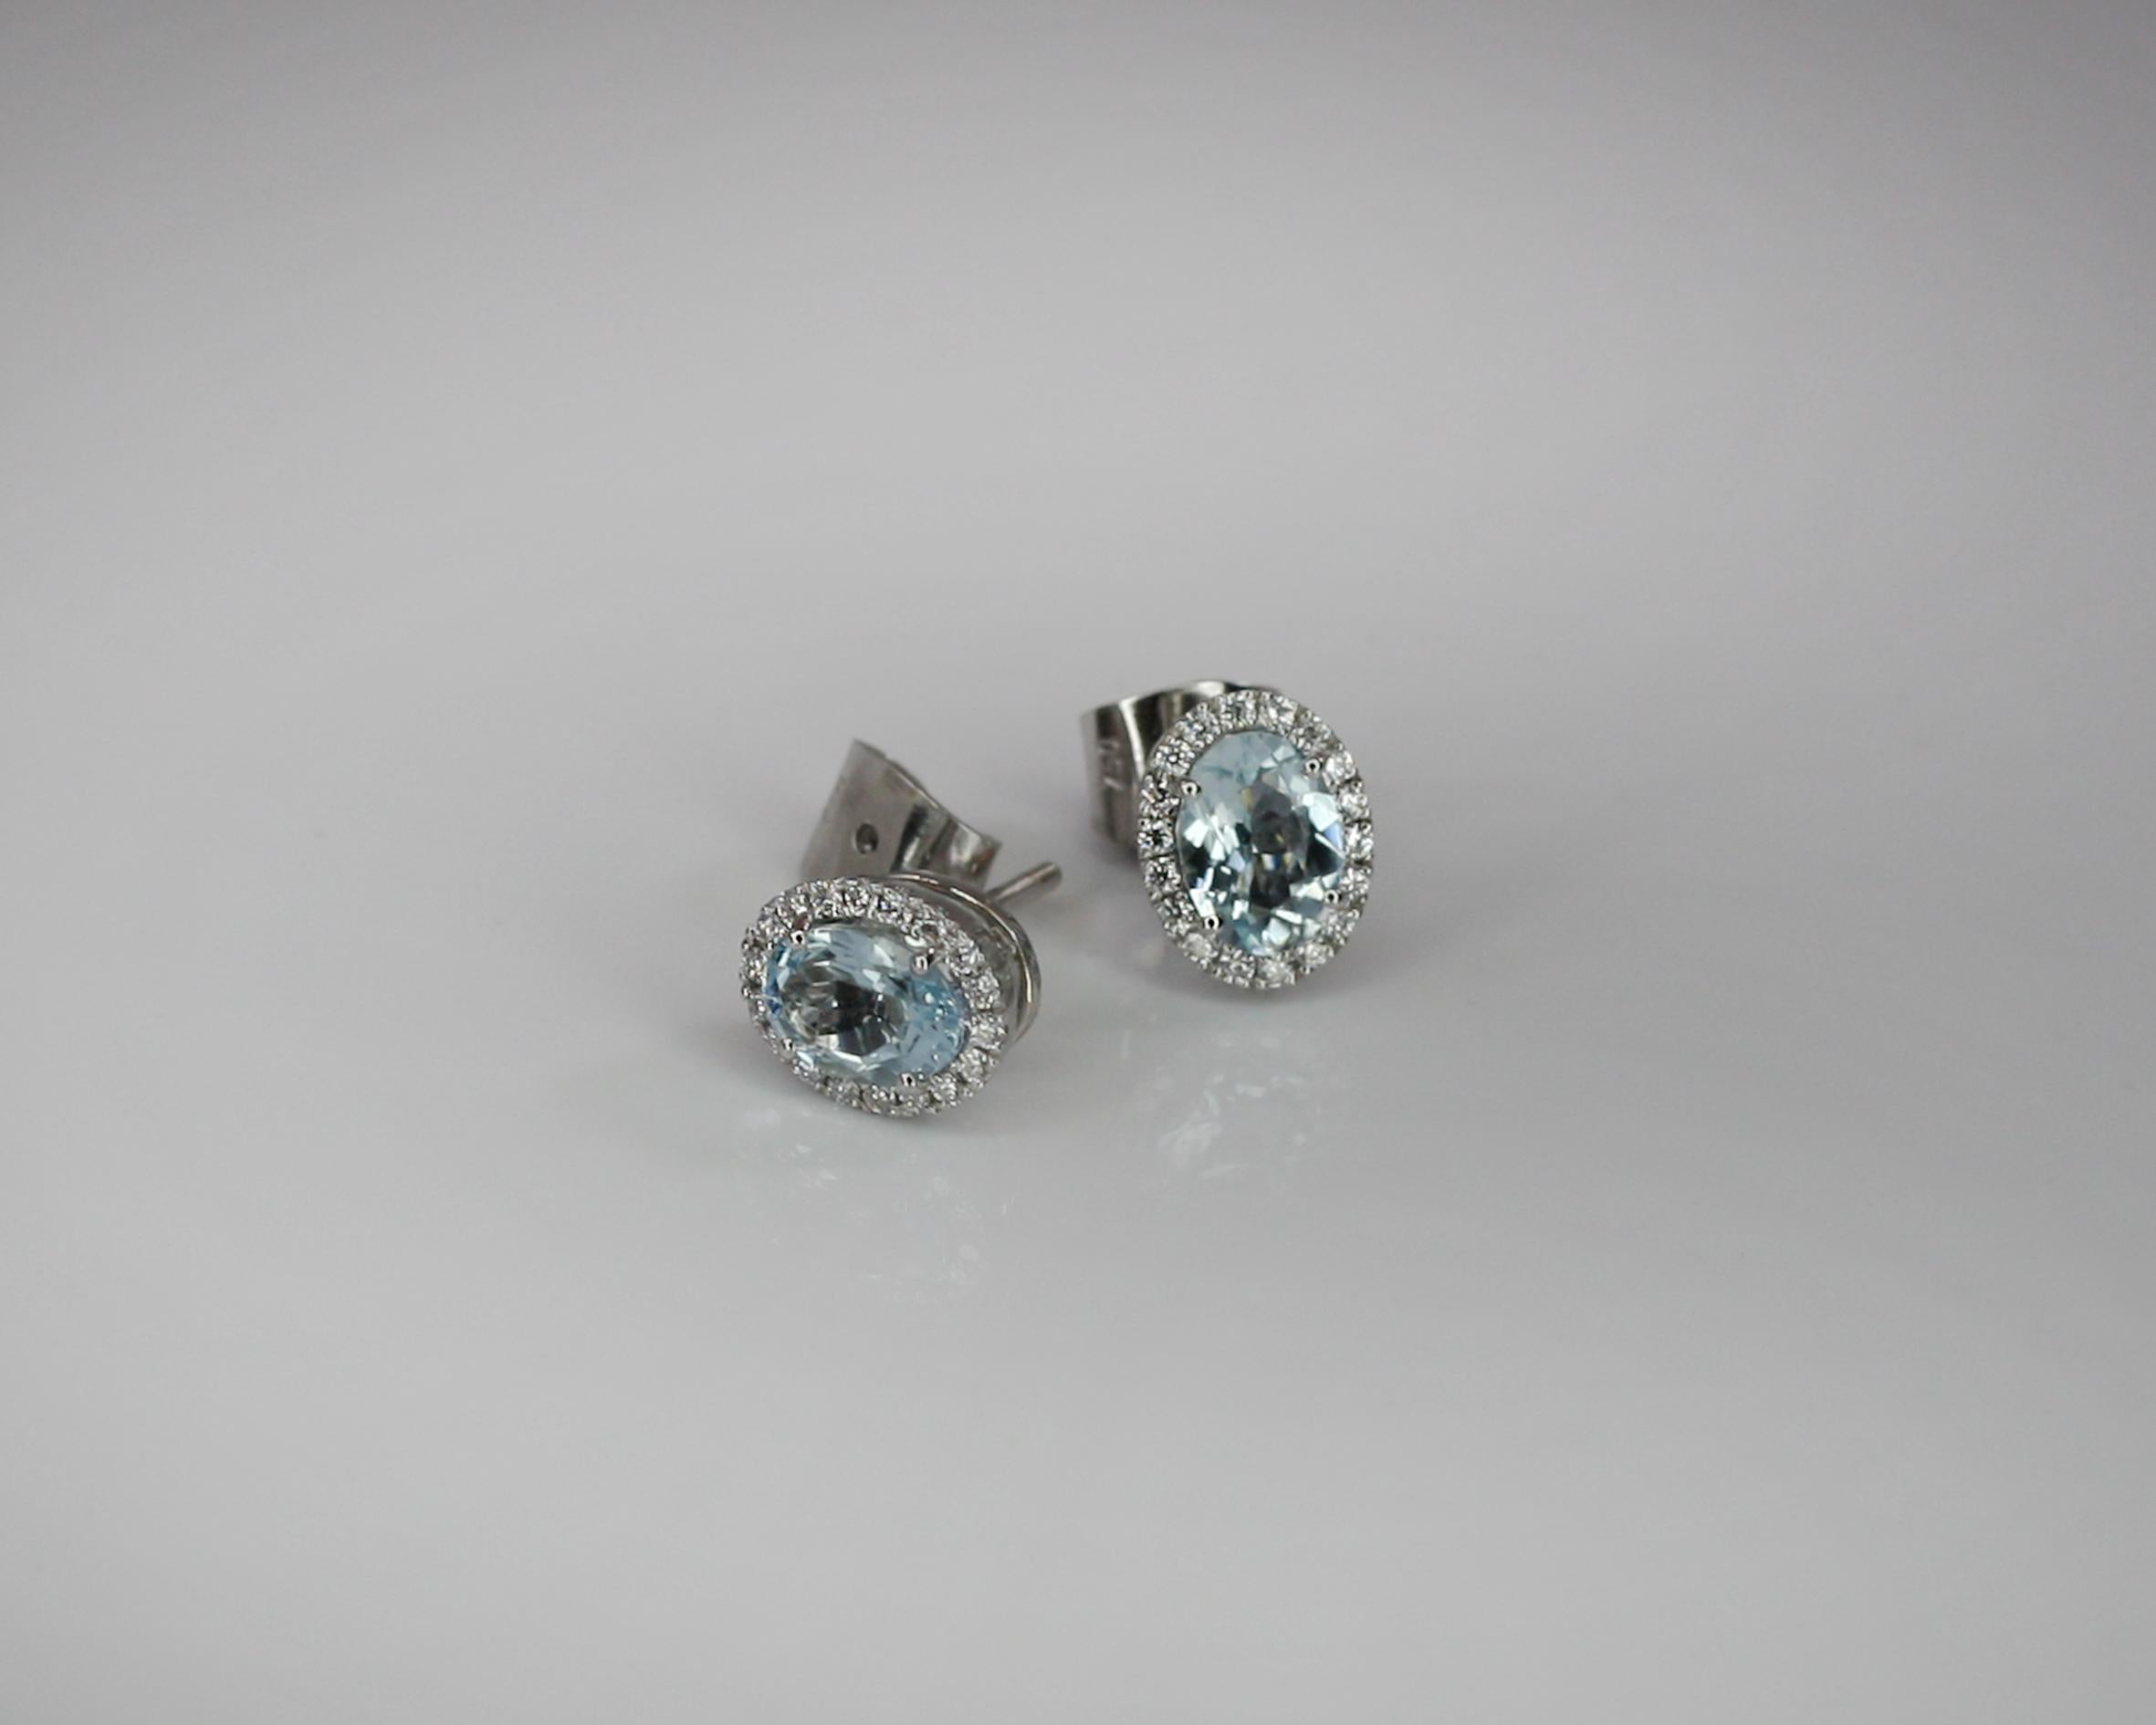 These S.Georgios designer stud earrings are hand made from 18 Karat White Gold to create a classic and elegant look. These beautiful earrings feature 2 oval shape natural Aquamarines total weight 1.30 Carat, surrounded by 36 natural brilliant cut